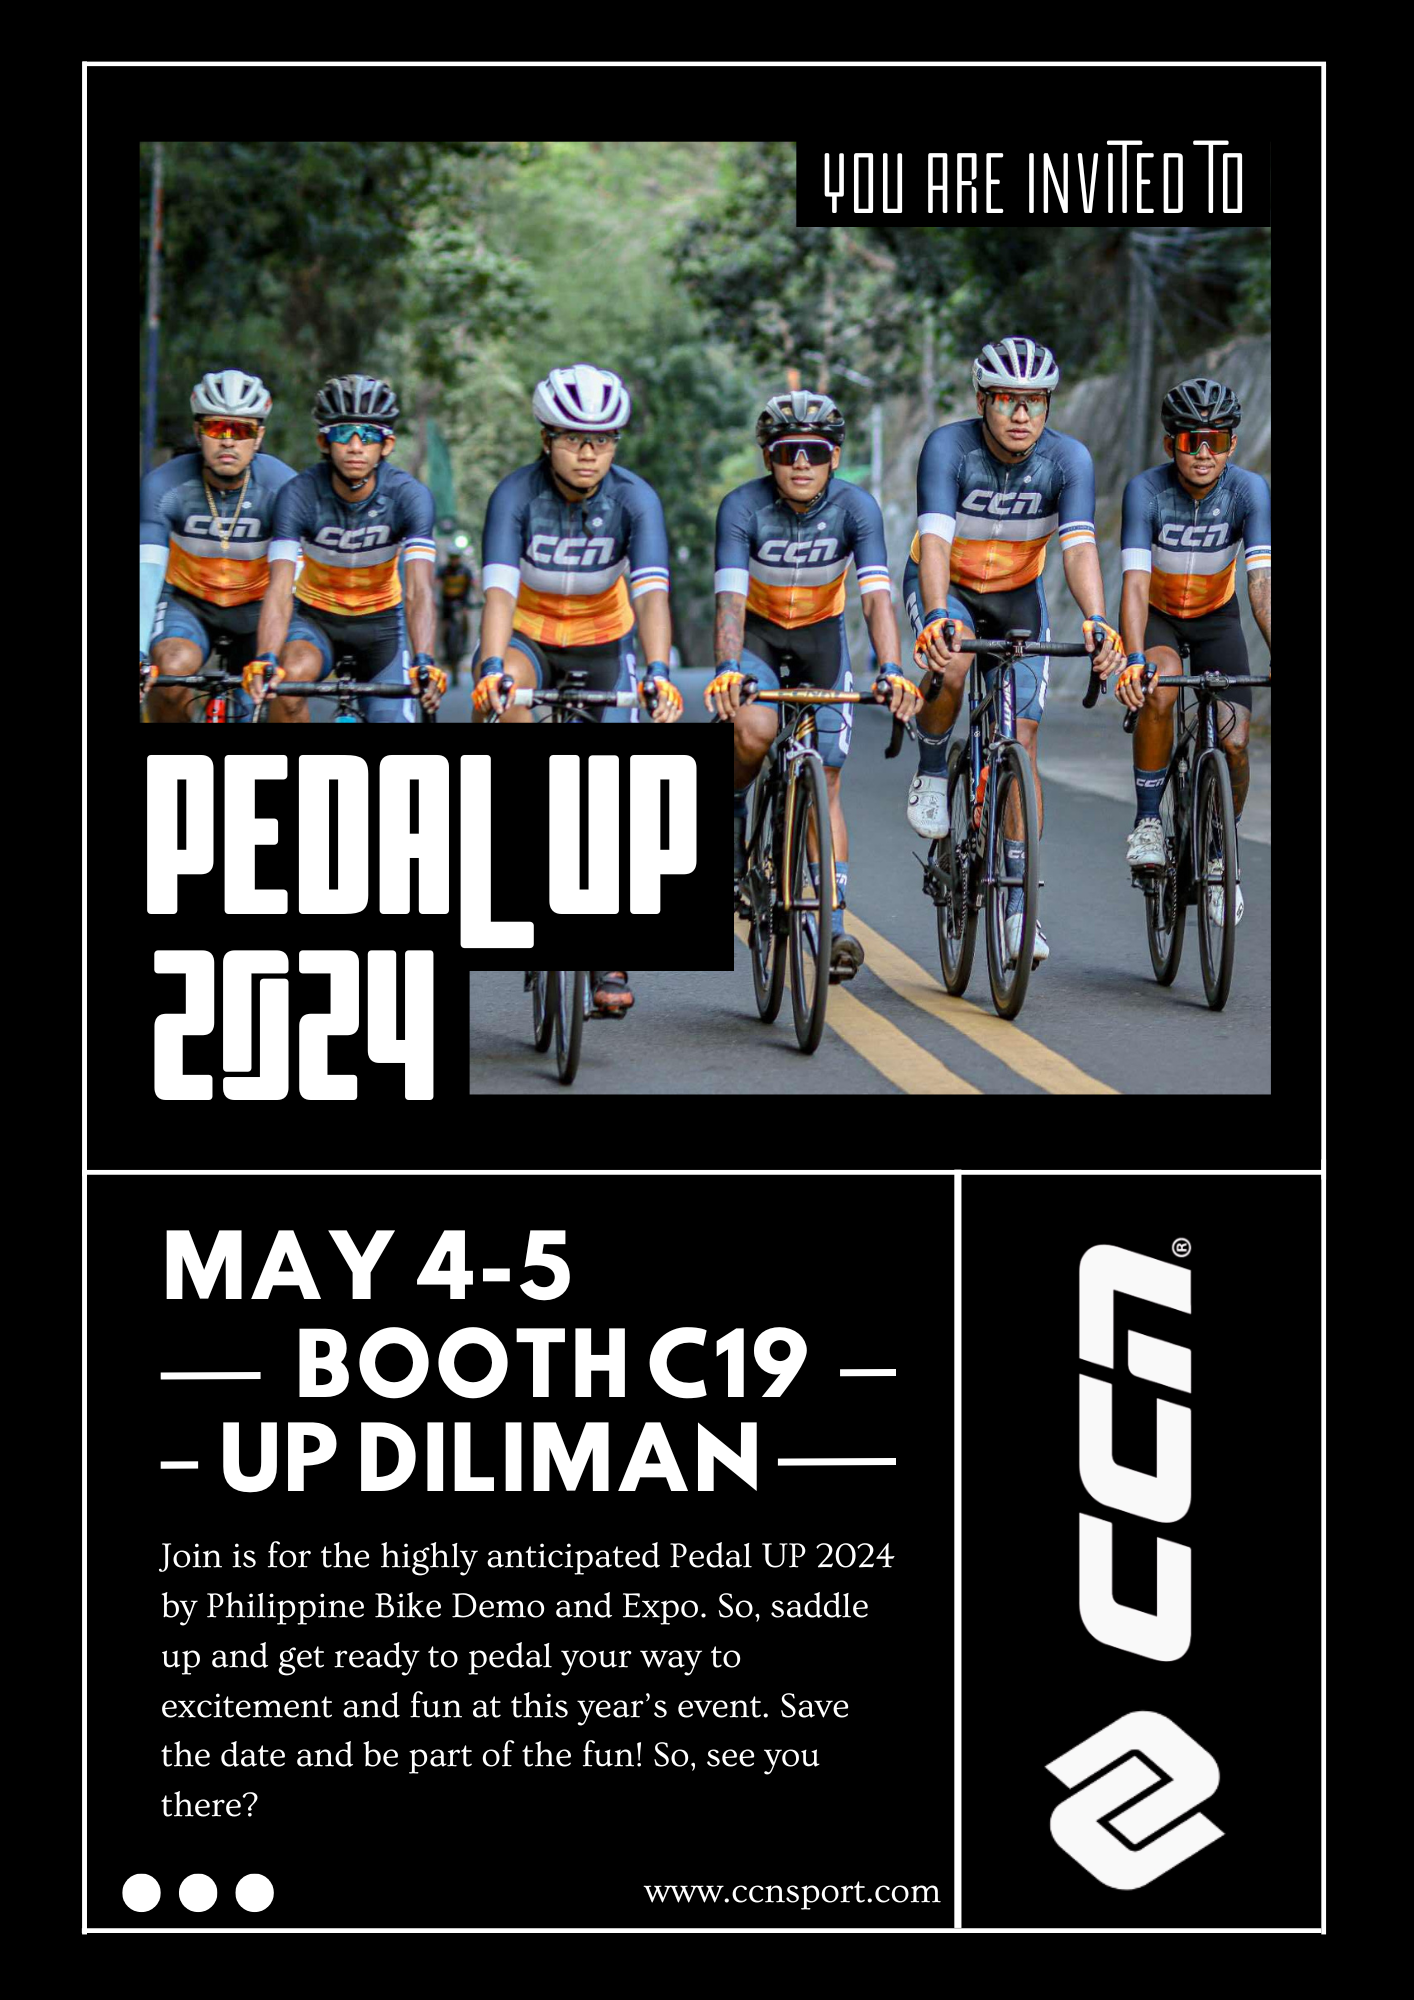 Pedal UP 2024: Uniting Cyclists at the Philippine Bicycle Demo &amp; Expo